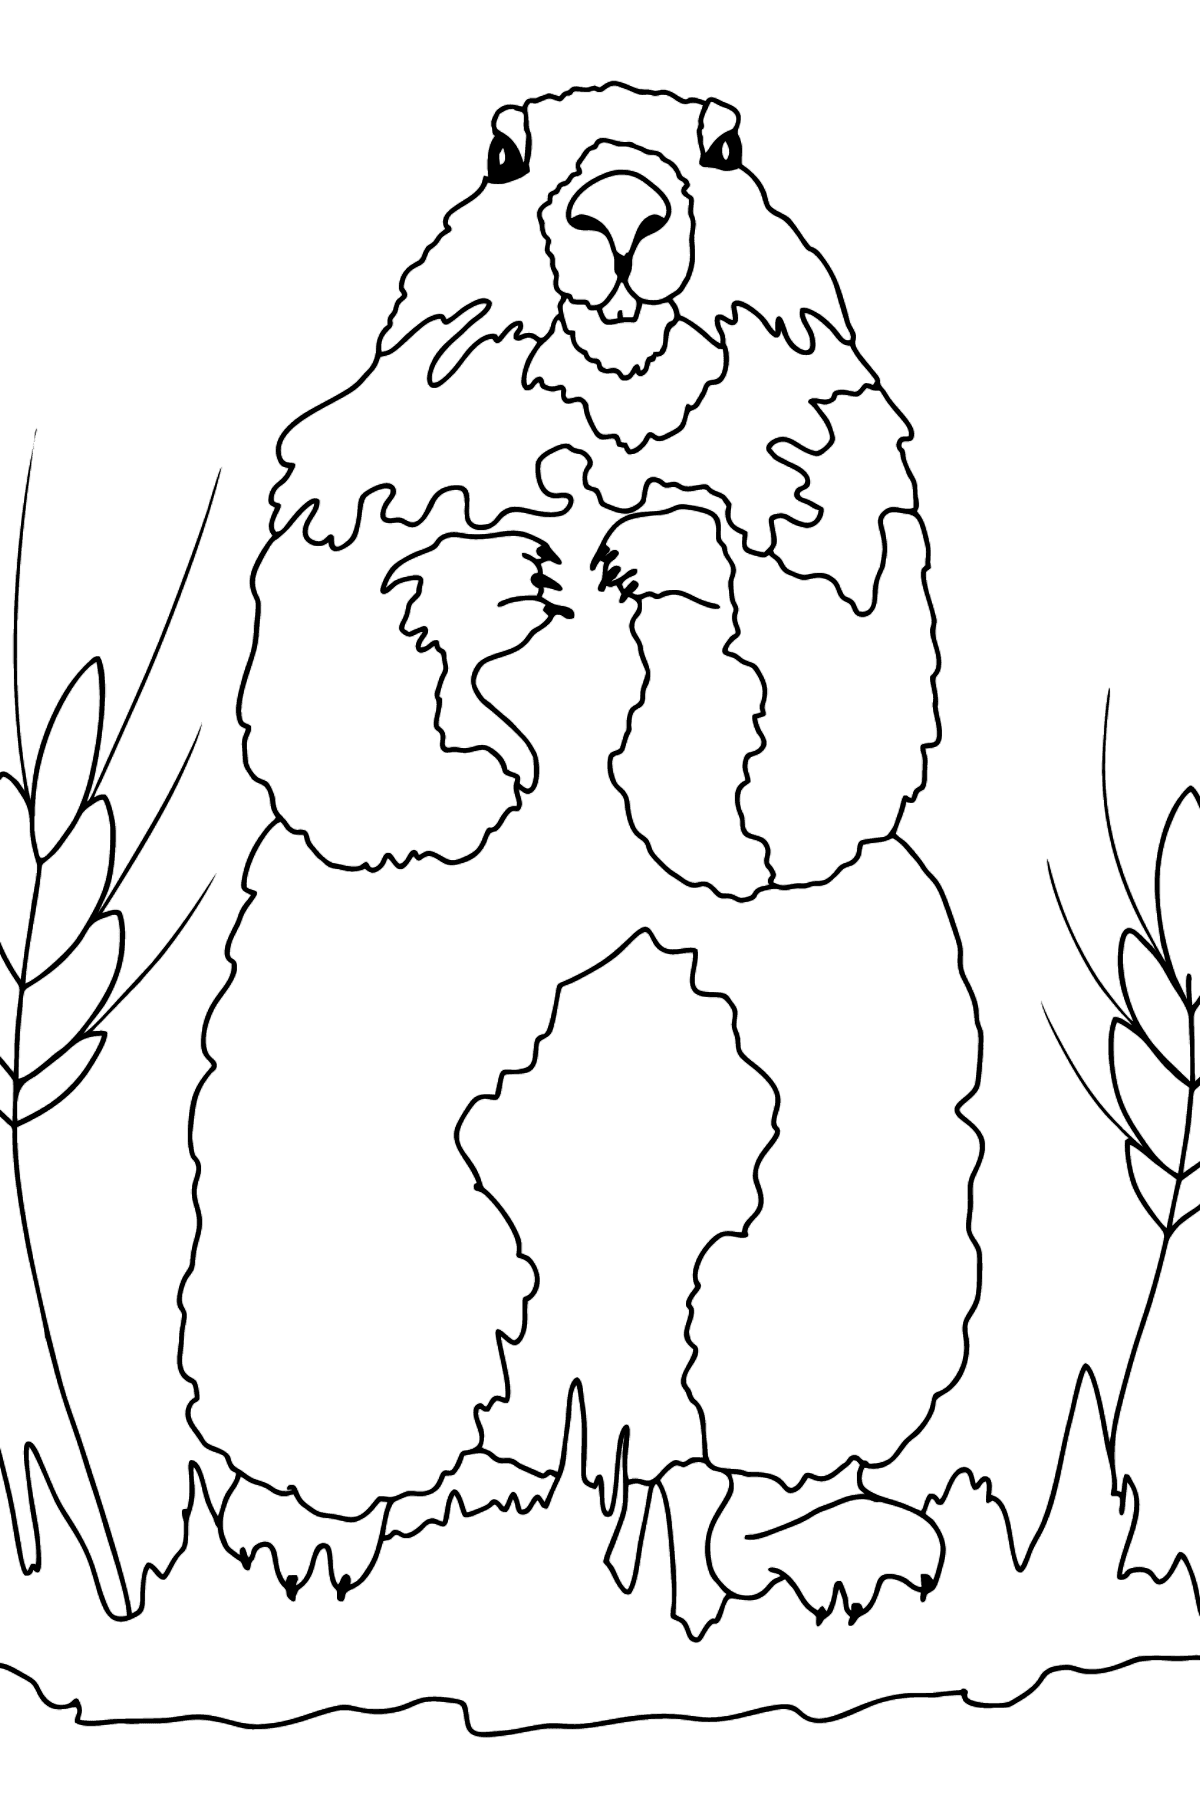 Coloring Page - A Groundhog is Looking out of Its Burrow - Coloring Pages for Kids